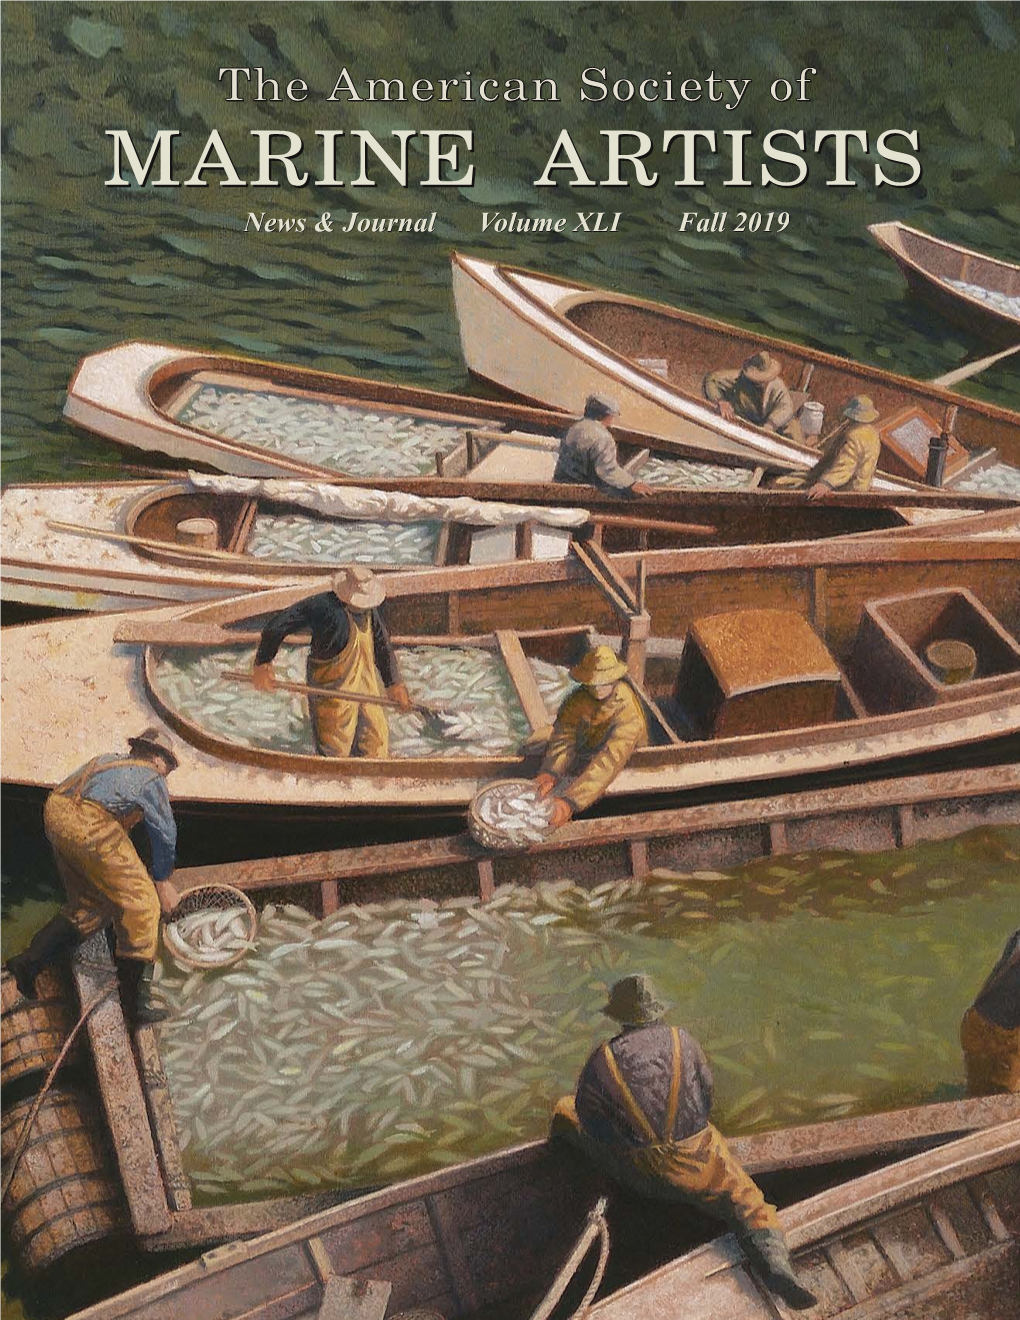 AMERICAN SOCIETY of MARINE ARTISTS 501(C)3 Organization of Fish and Fisheries 5